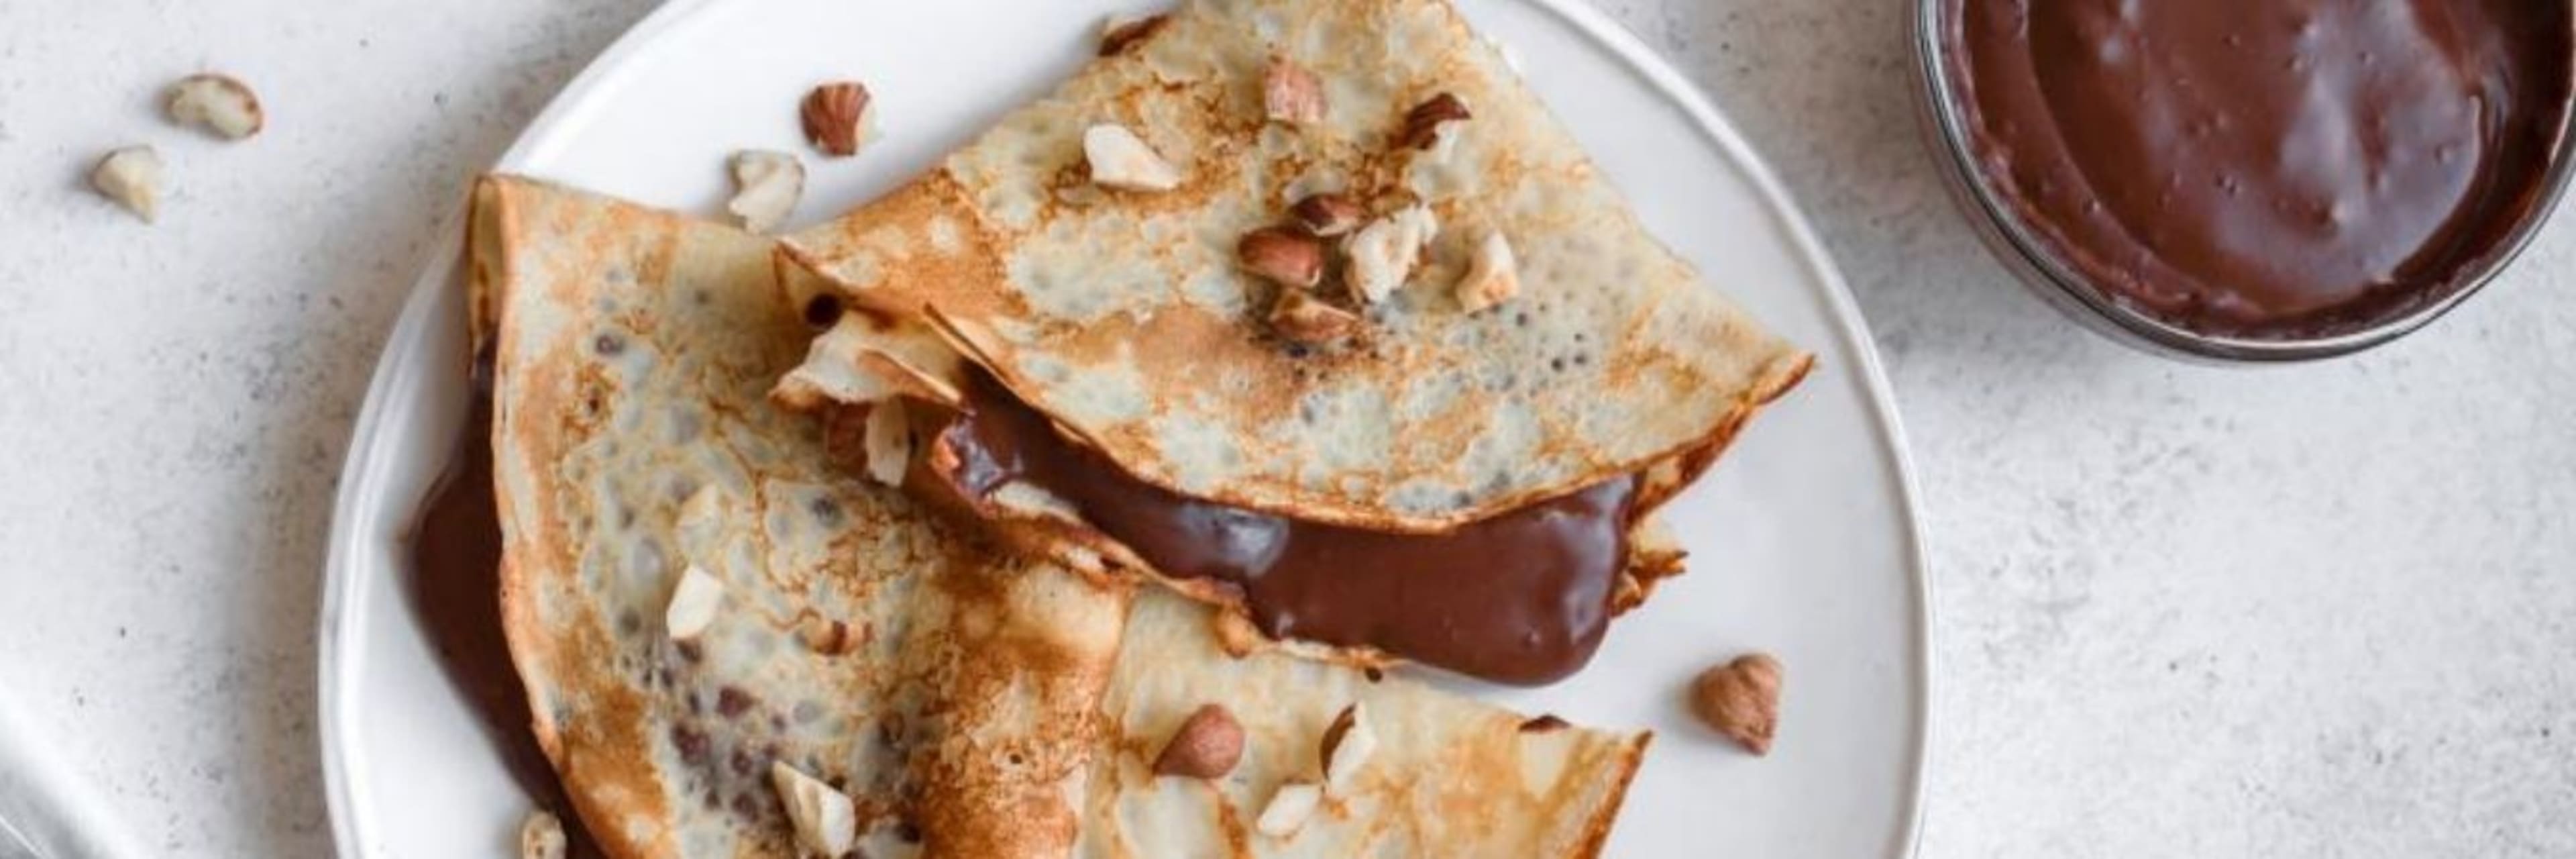 Header Carroussel 2 ( crepes)